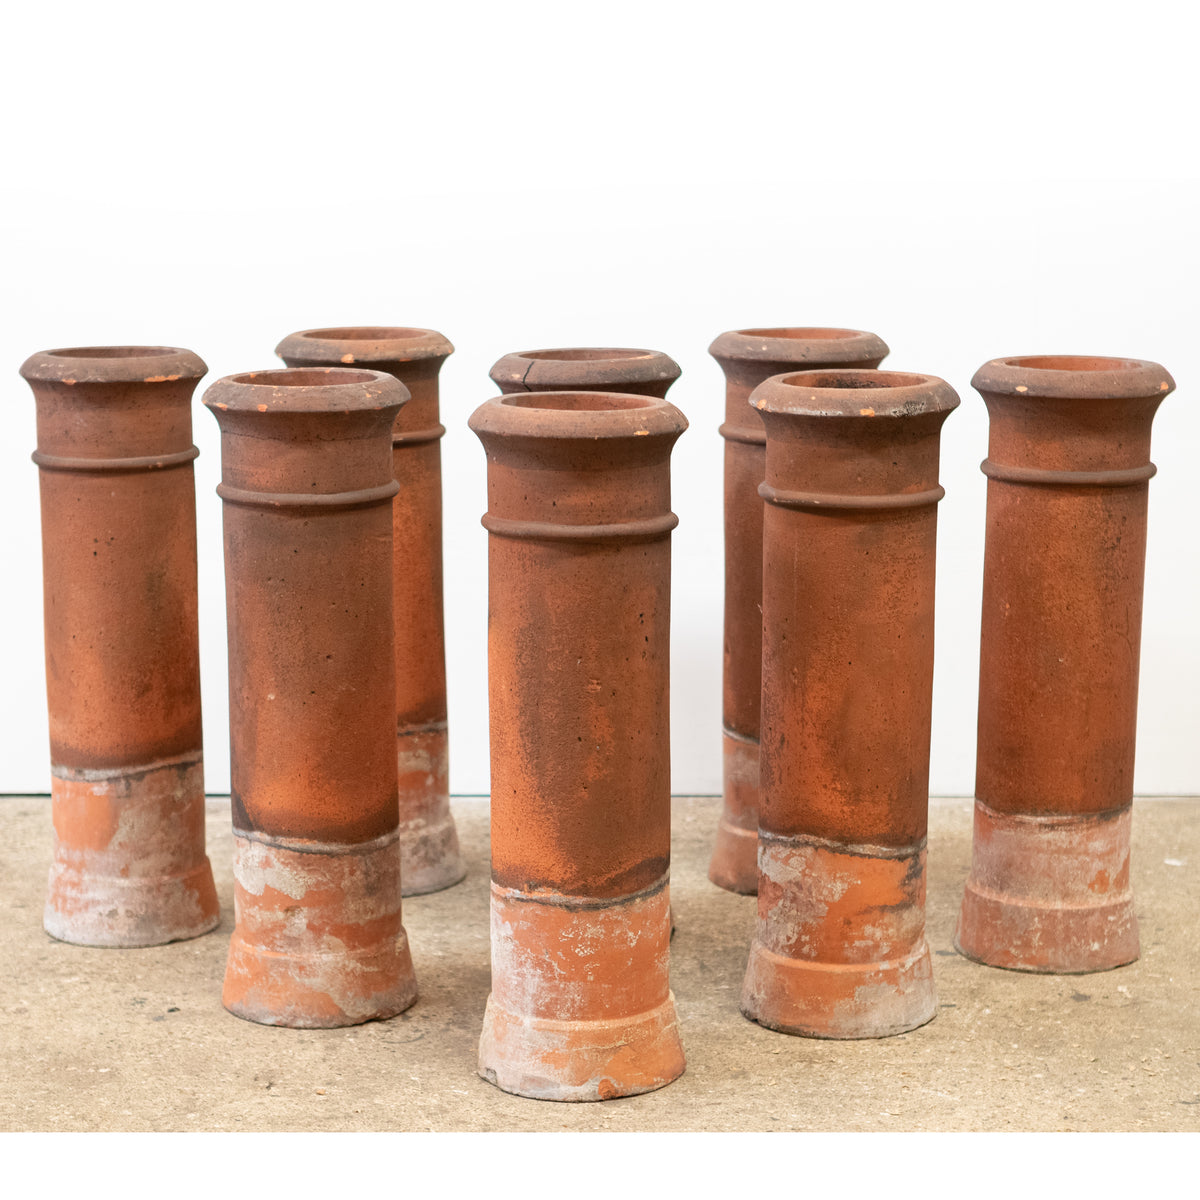 Antique Terracotta Chimney Stacks | Chimney Pots | Planters | The Architectural Forum